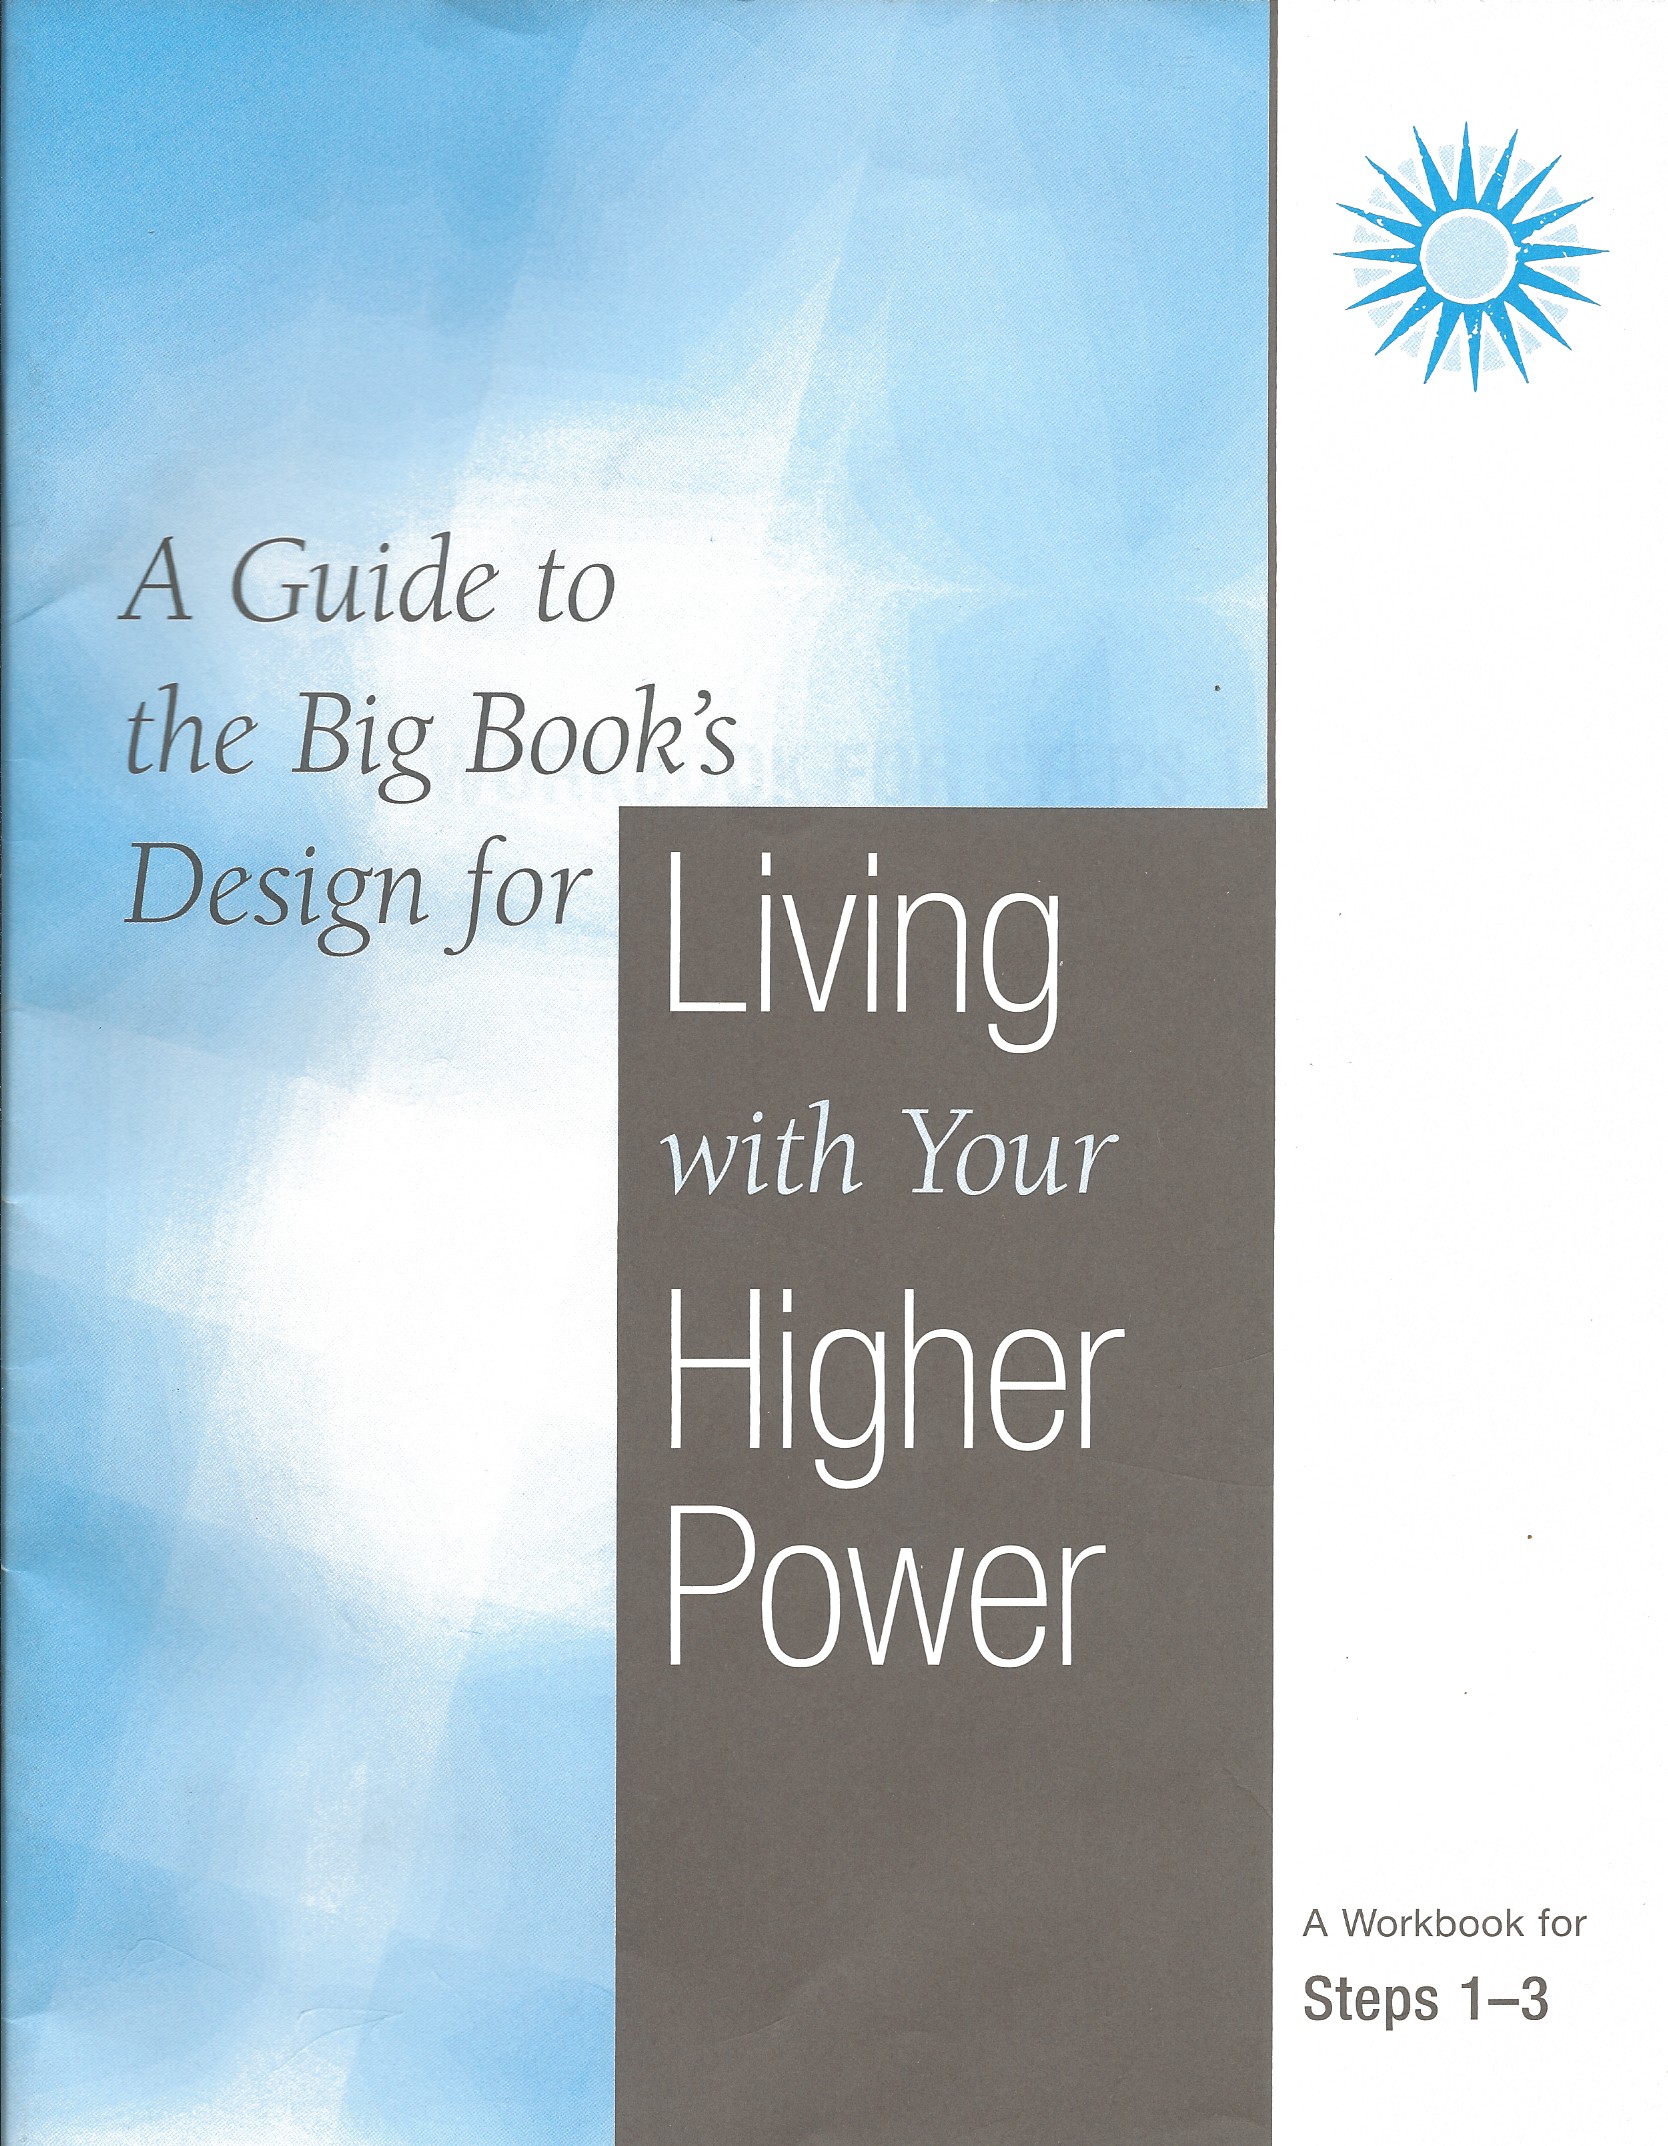 A Guide to the Big Book's Design for Living with a Higher